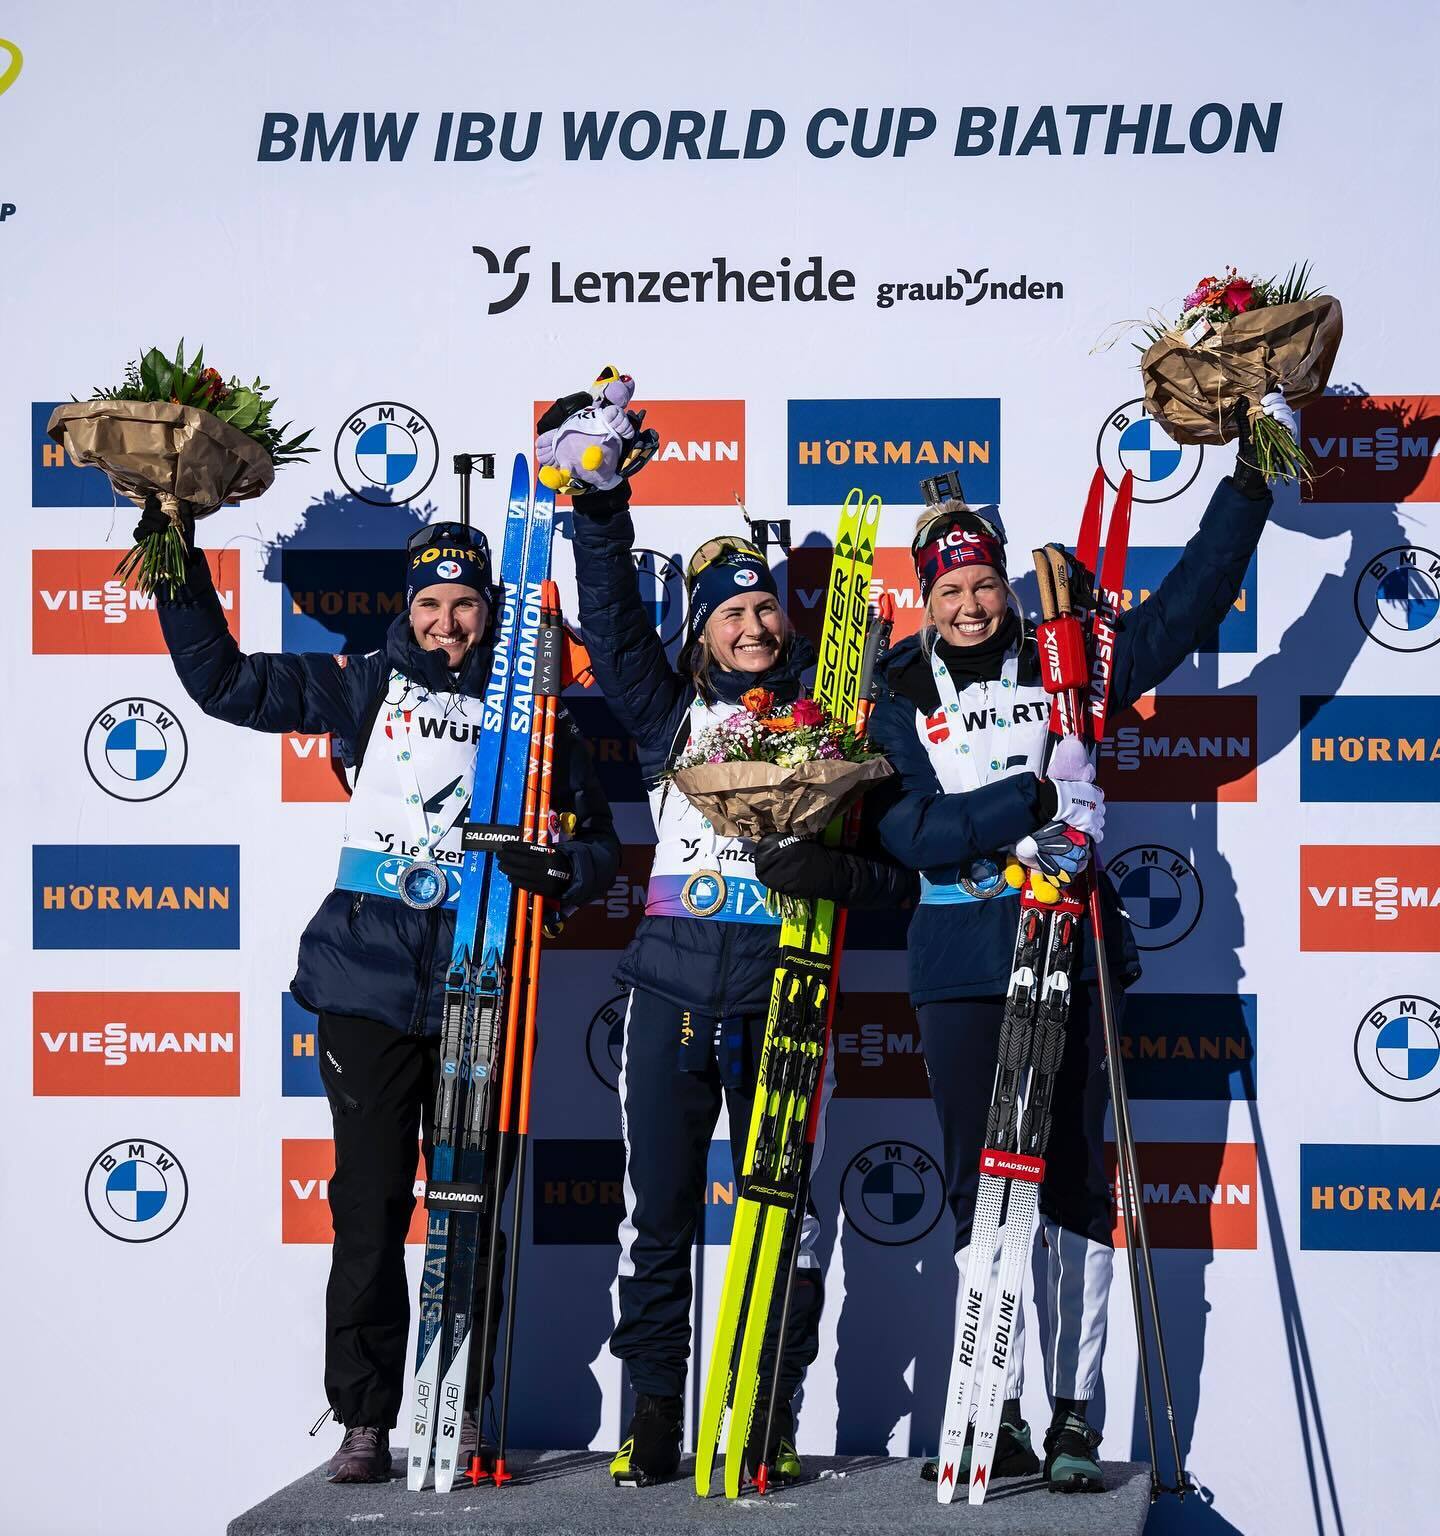 A saleswoman from Norway sensationally won a medal at the Biathlon World Cup. Photo 